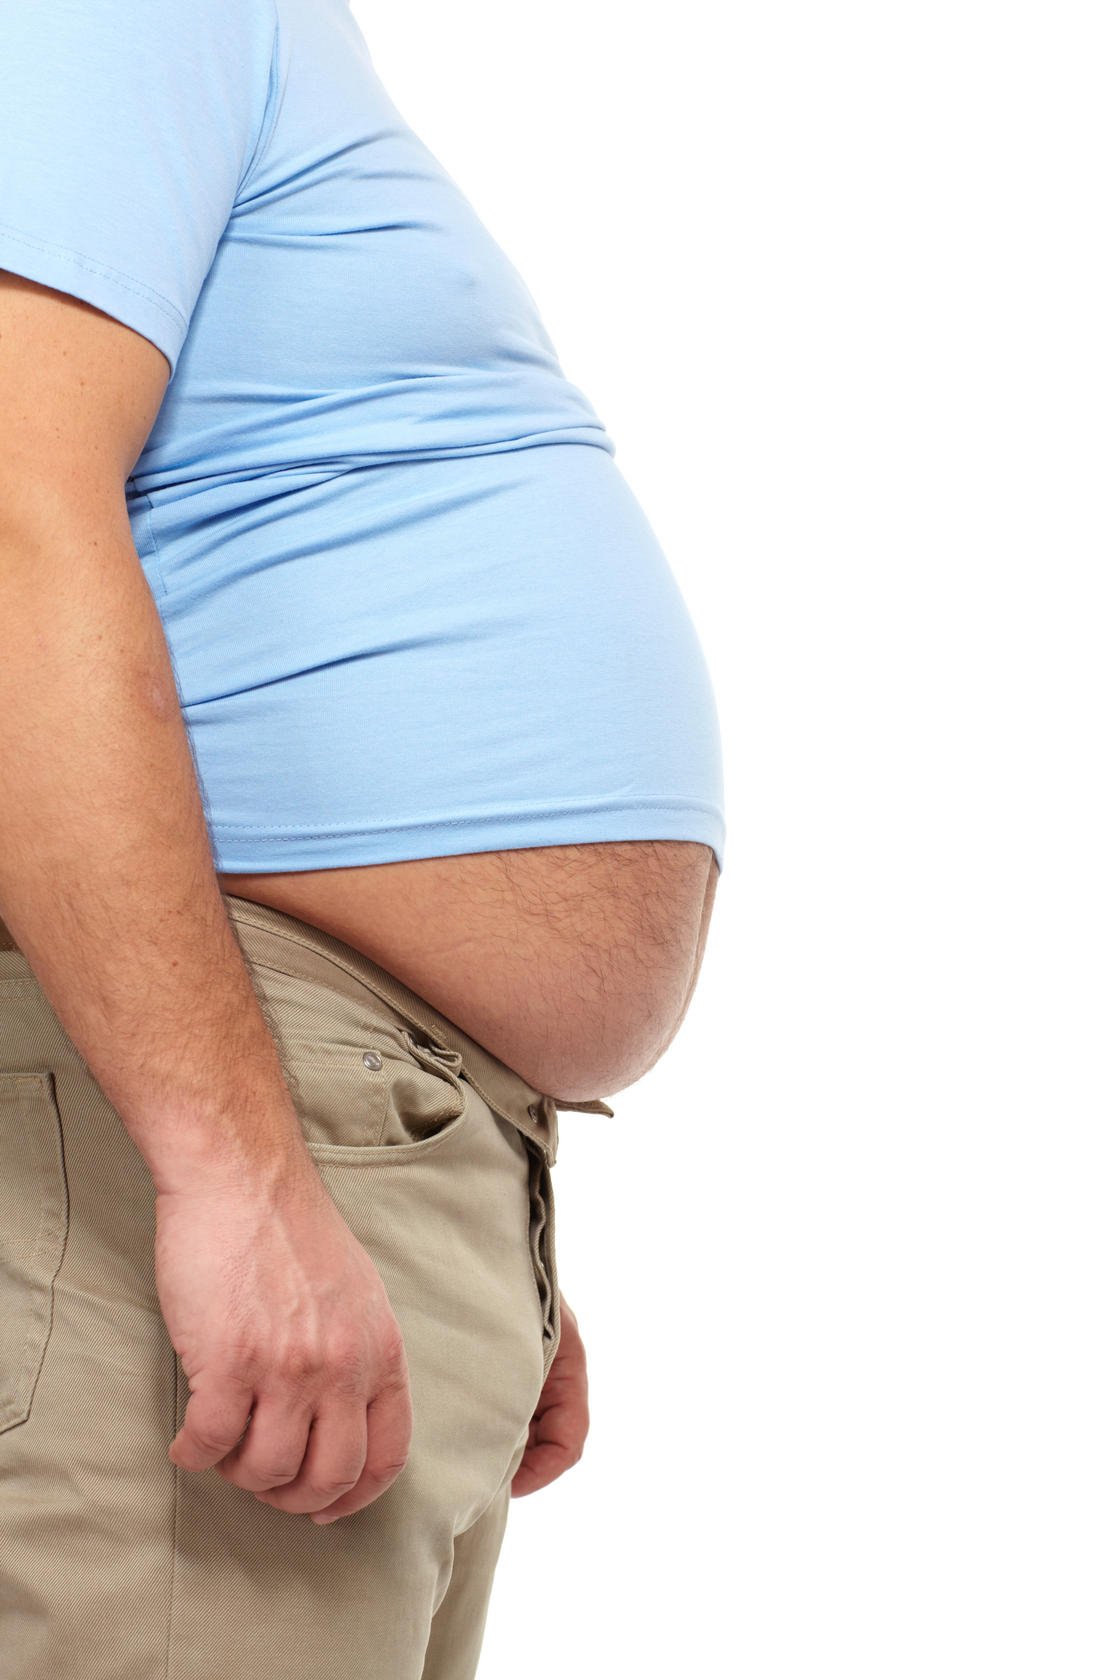 Overweight/obesity levels generally increase as age advances.